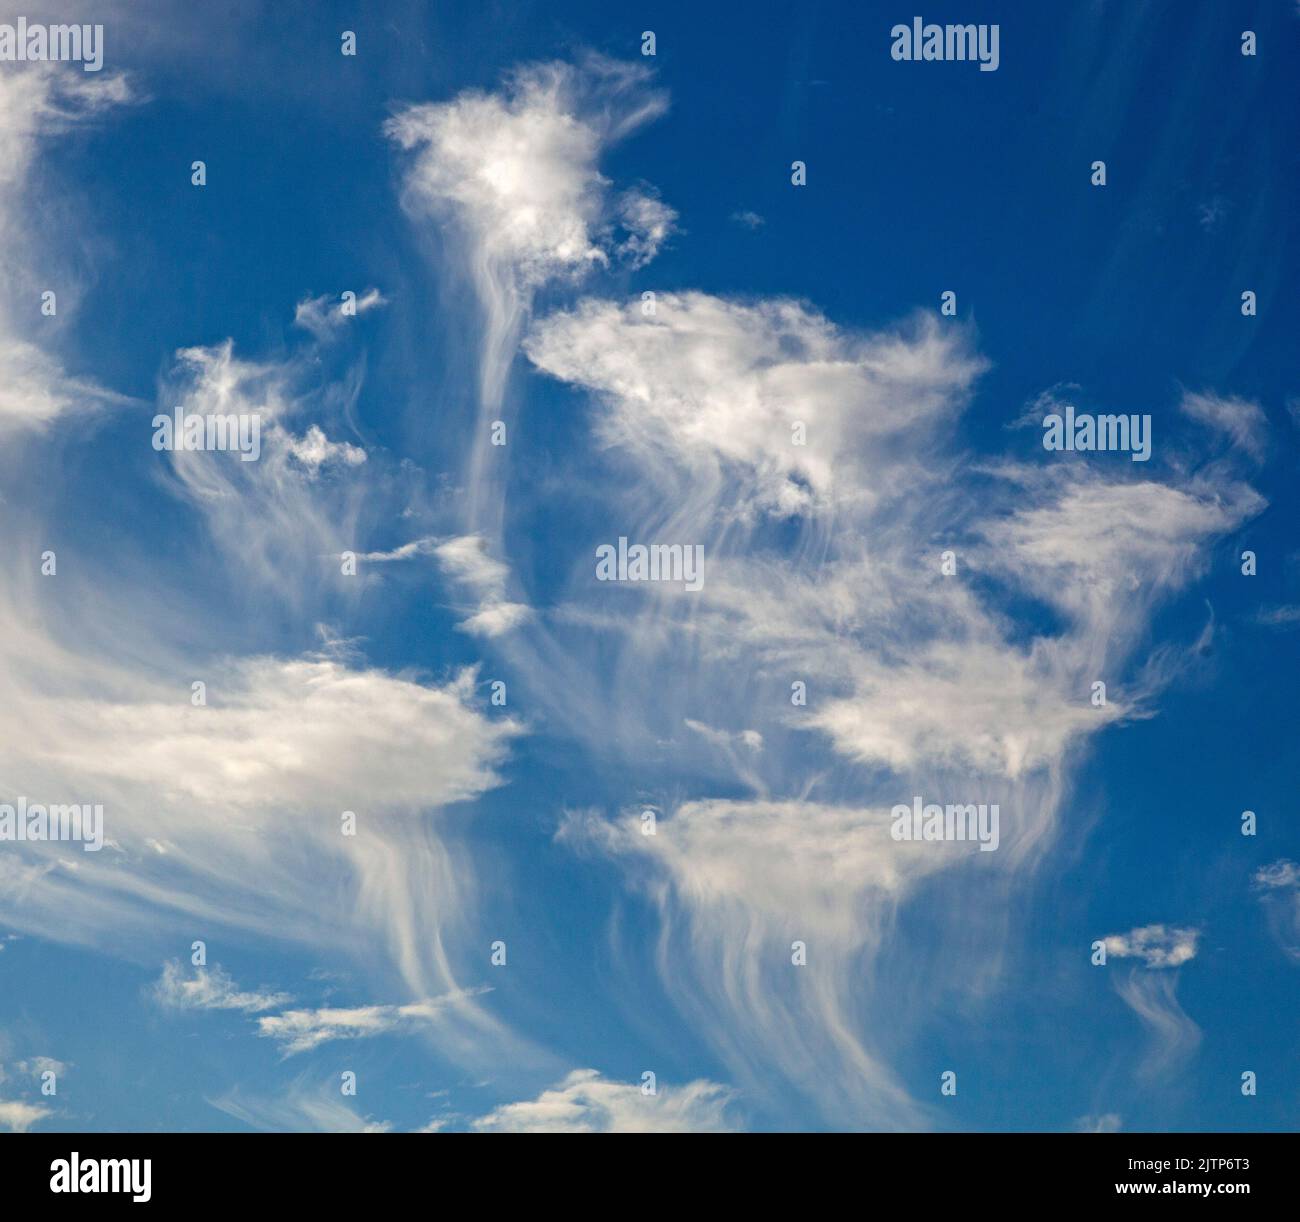 Edinburgh, Scotland, UK, 1st Septmber 2022. Jellyfish shaped Cirrus Clouds against a blue sky form an interesting pattern in the morning sky. Credit: Archwhite/alamy live news. Stock Photo